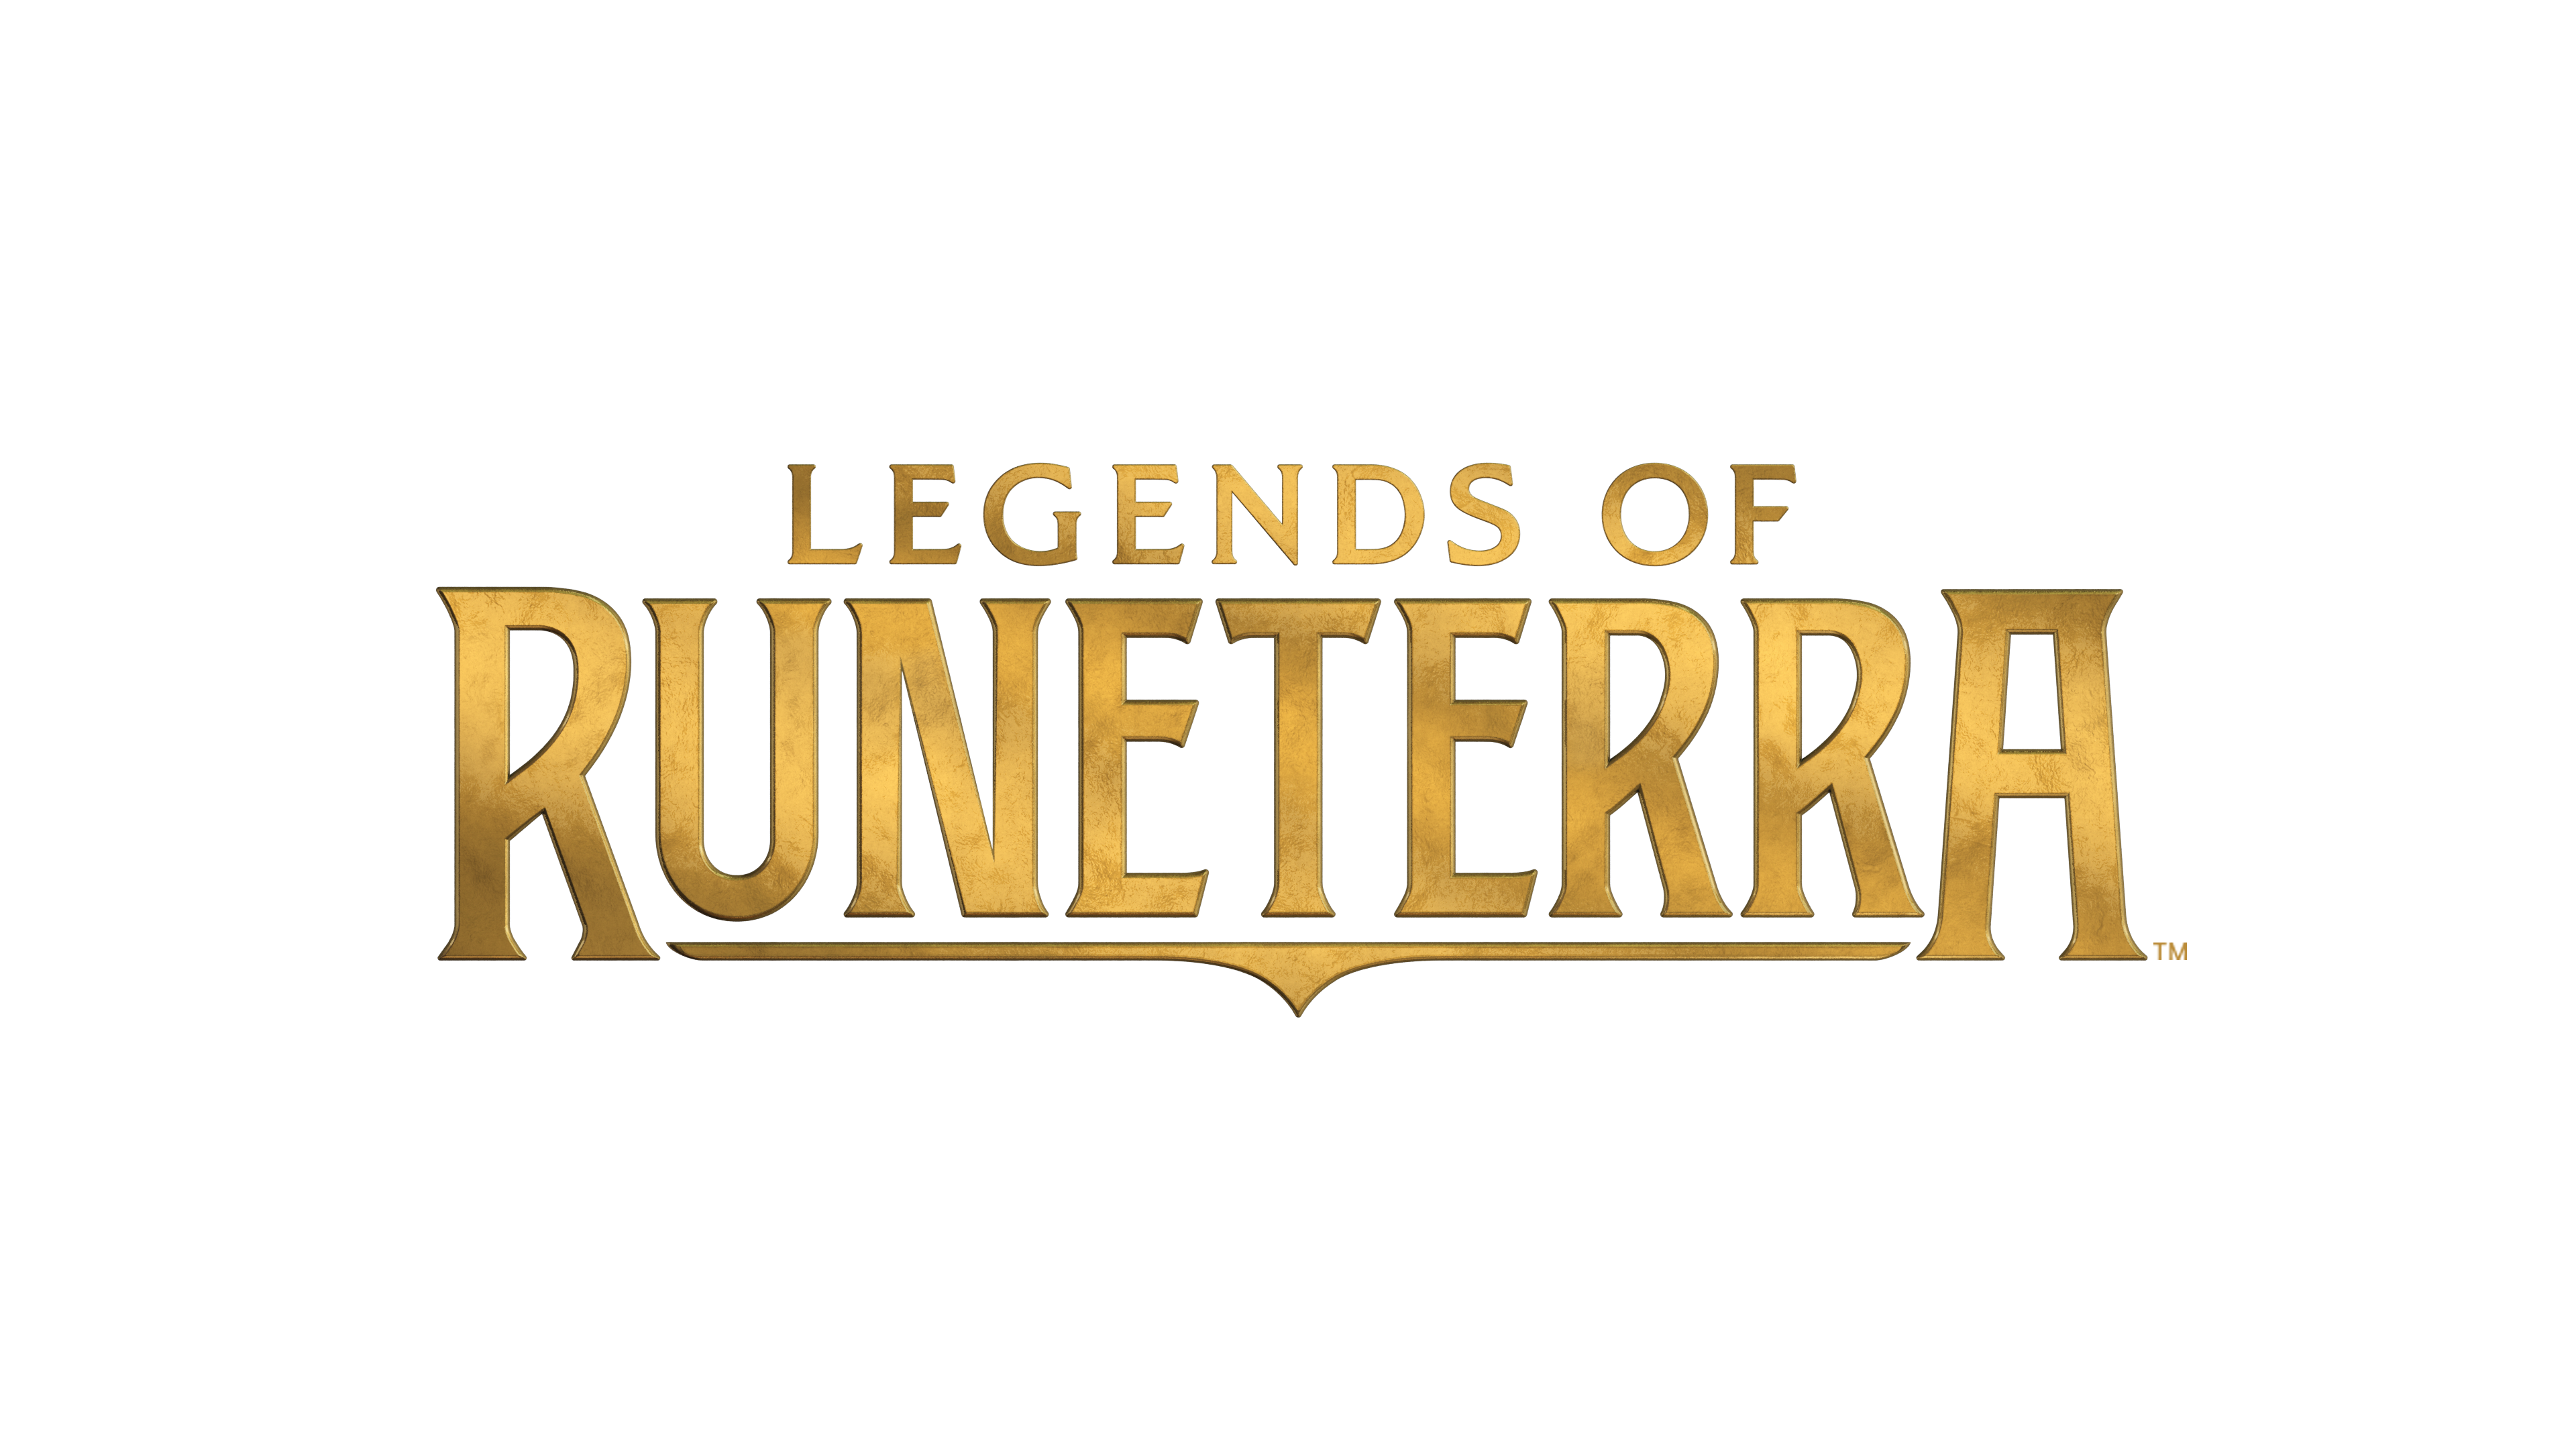 league of legends logo without text